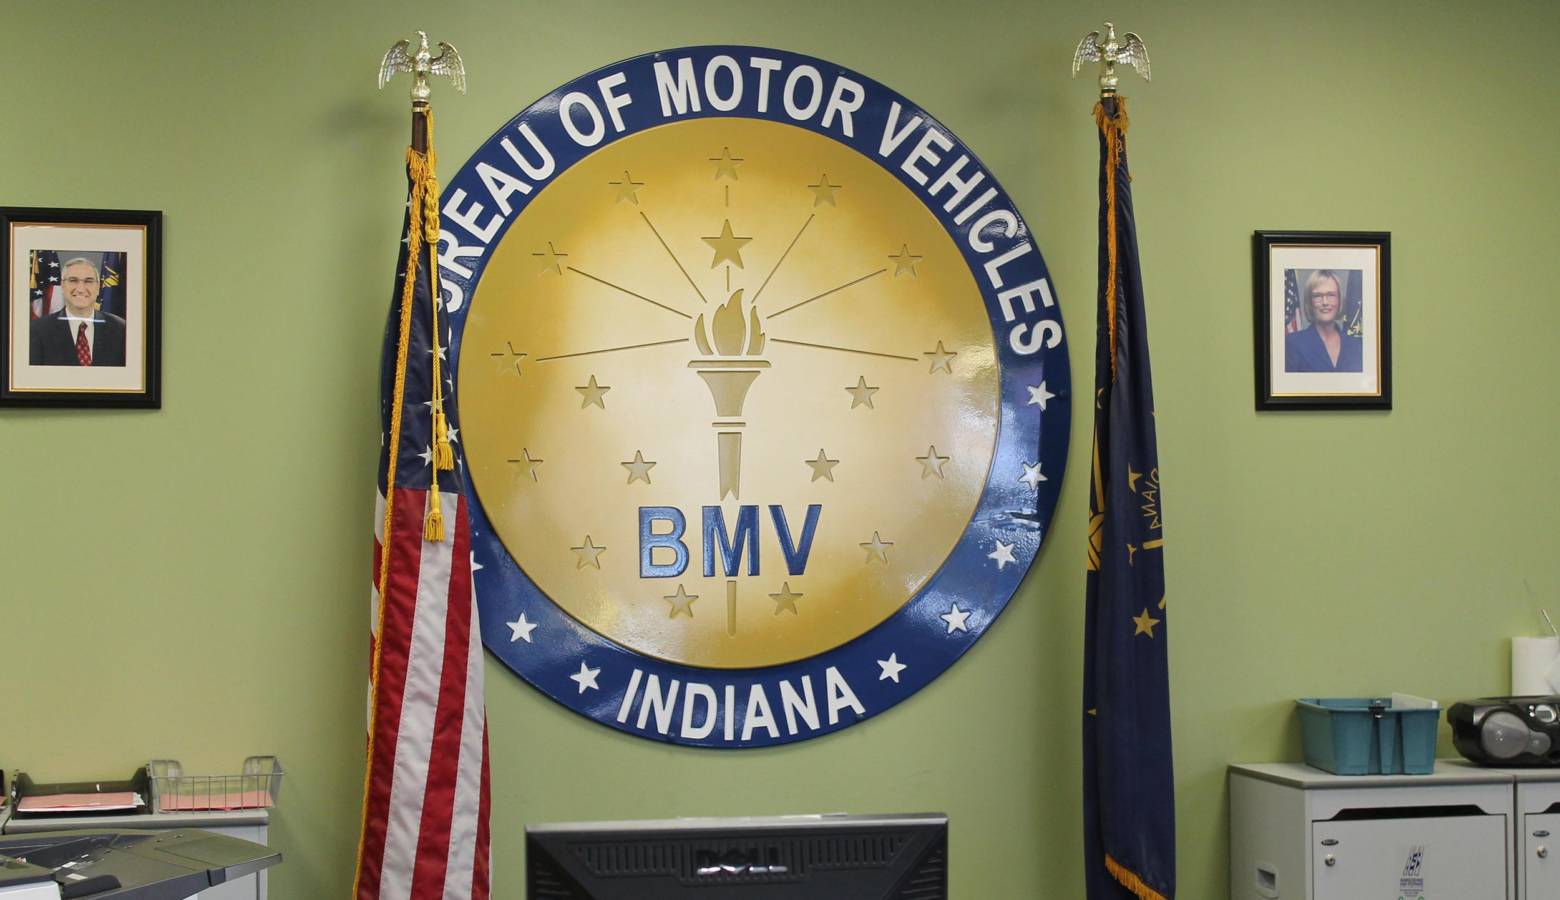 The Trump administration wants states to hand over that info after federal courts denied its push to add a citizenship question to the upcoming census. The Indiana BMV has declined that request. (Lauren Chapman/IPB News)